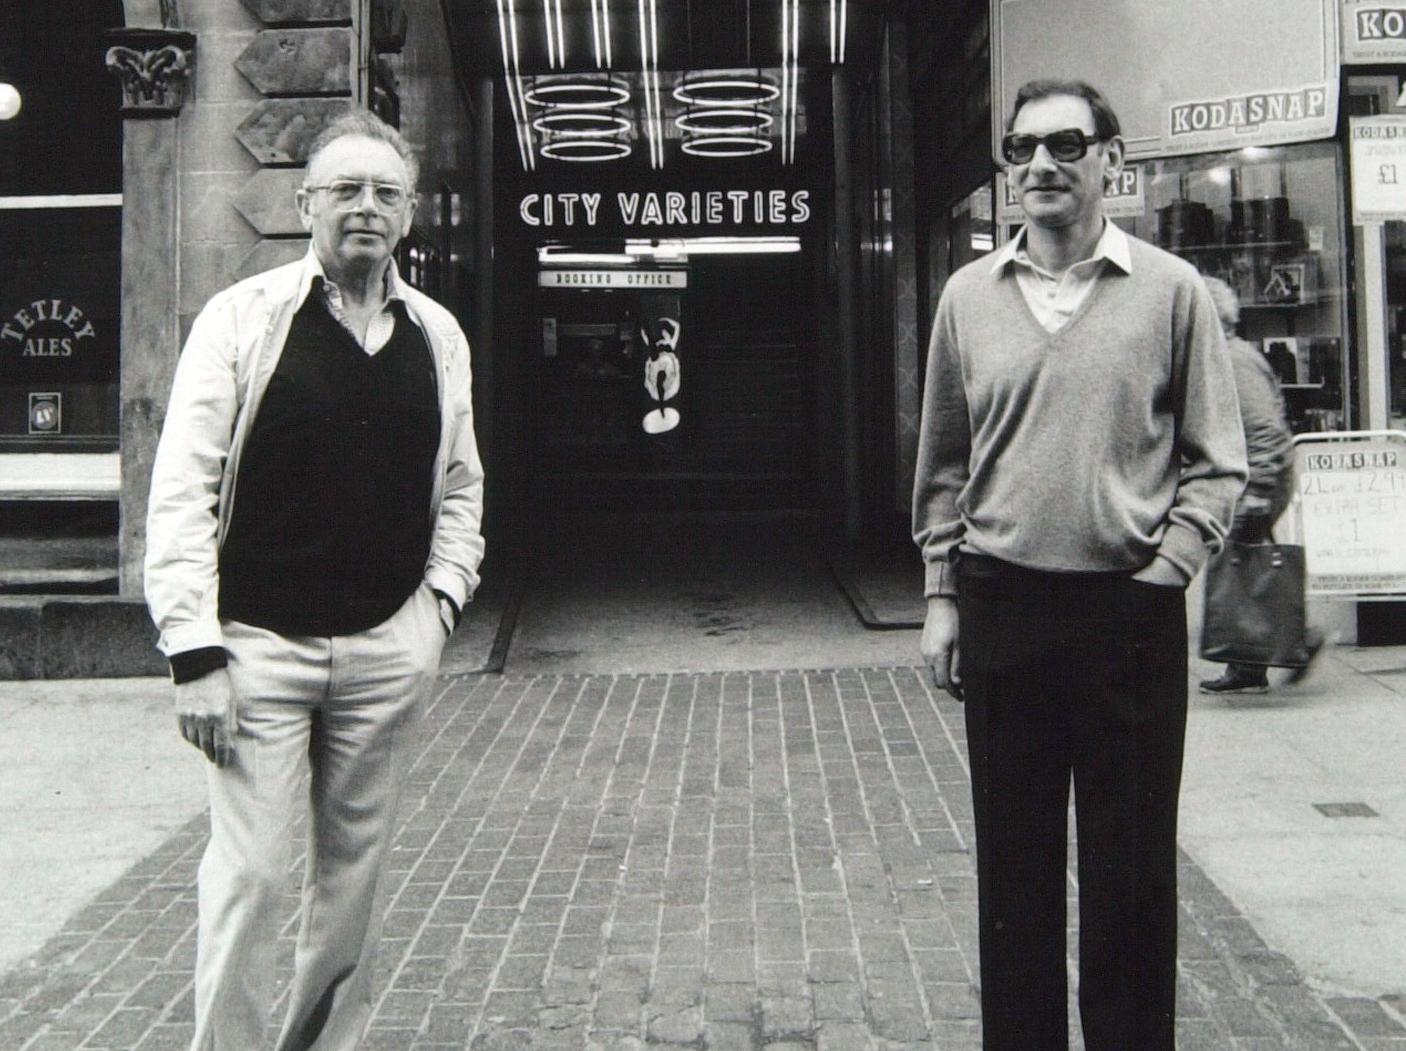 Leeds City Varieties was going up for sale. Co-director brothers Michael (right) and Stanley Joseph placed sale notices in both Leeds and London newspapers for the 686-seat theatre.